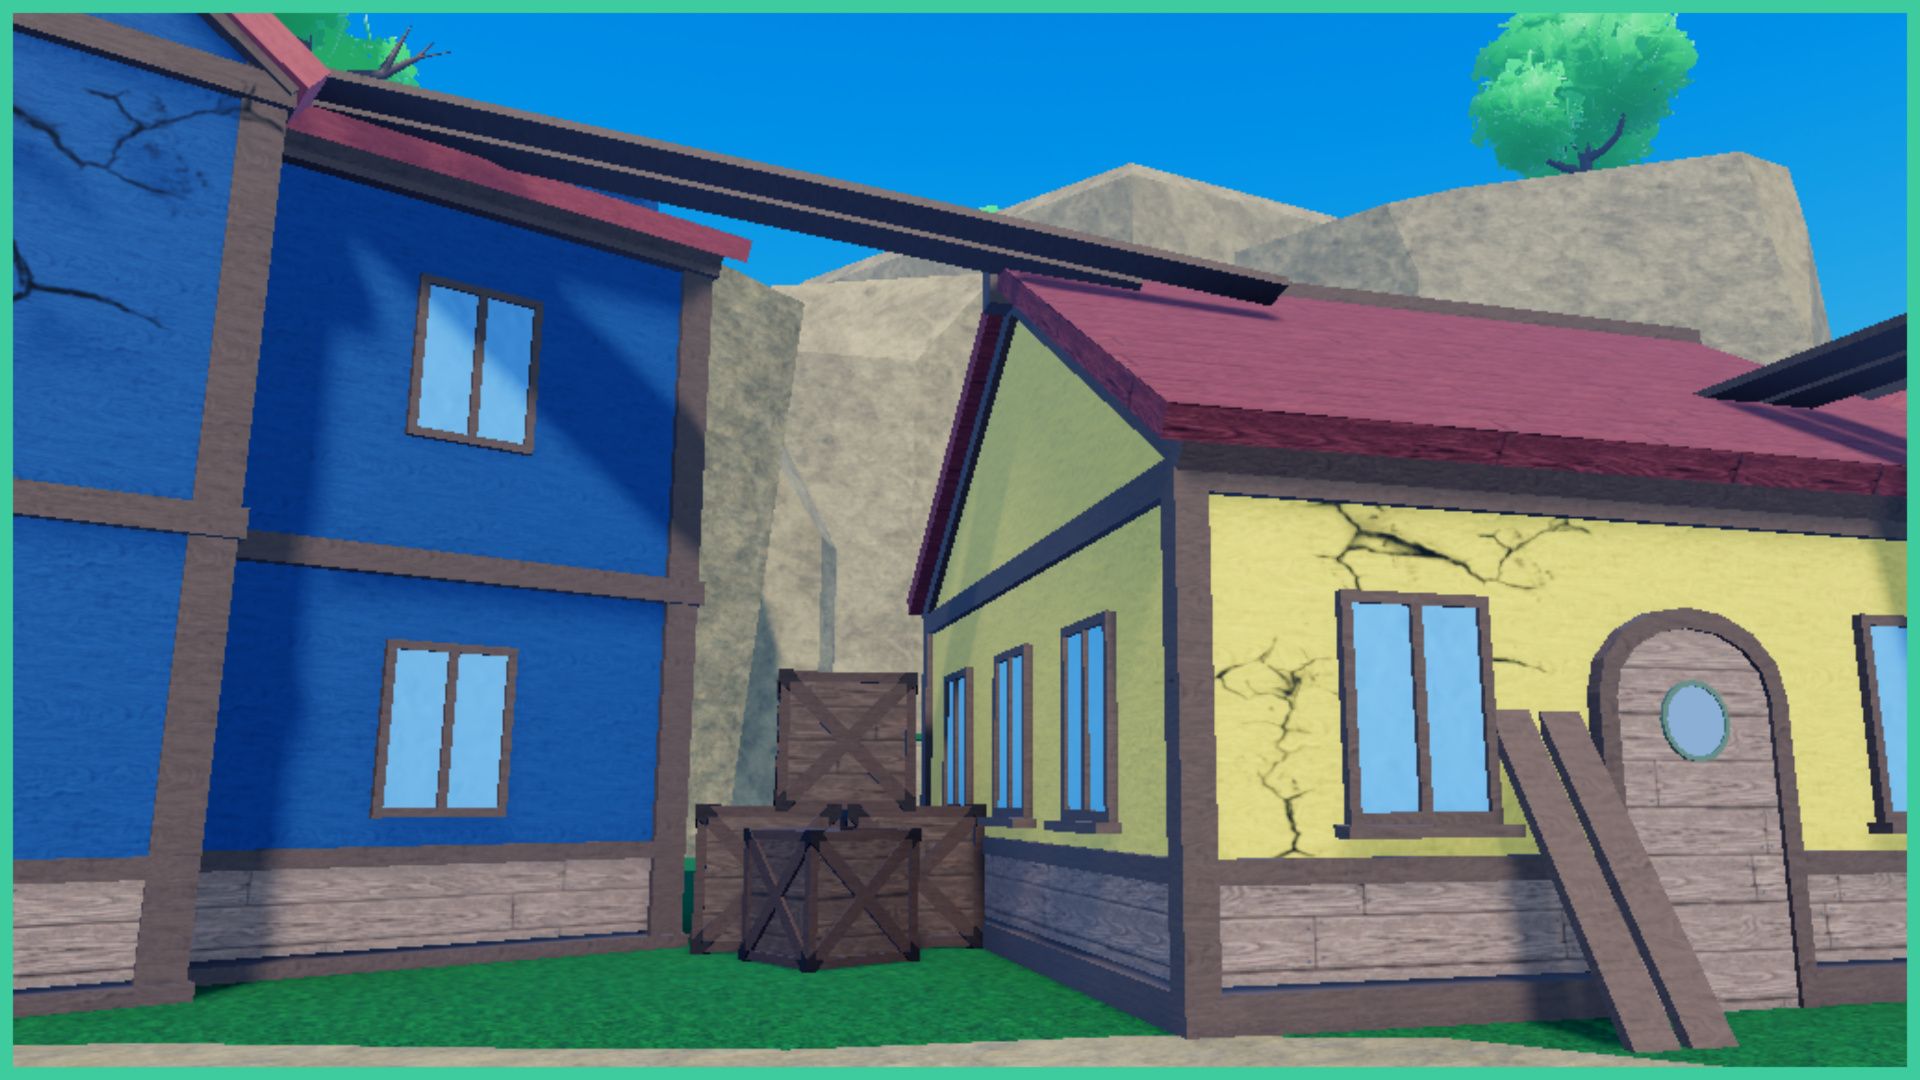 feature image for our cursed sea race tier list, the image is a screenshot of some houses in the first village, with a yellow one on the right and a taller blue one on the left, there are wooden planks resting against the front wall of the yellow house, as well as planks going across the two roofs. and wooden crates on the grass between them